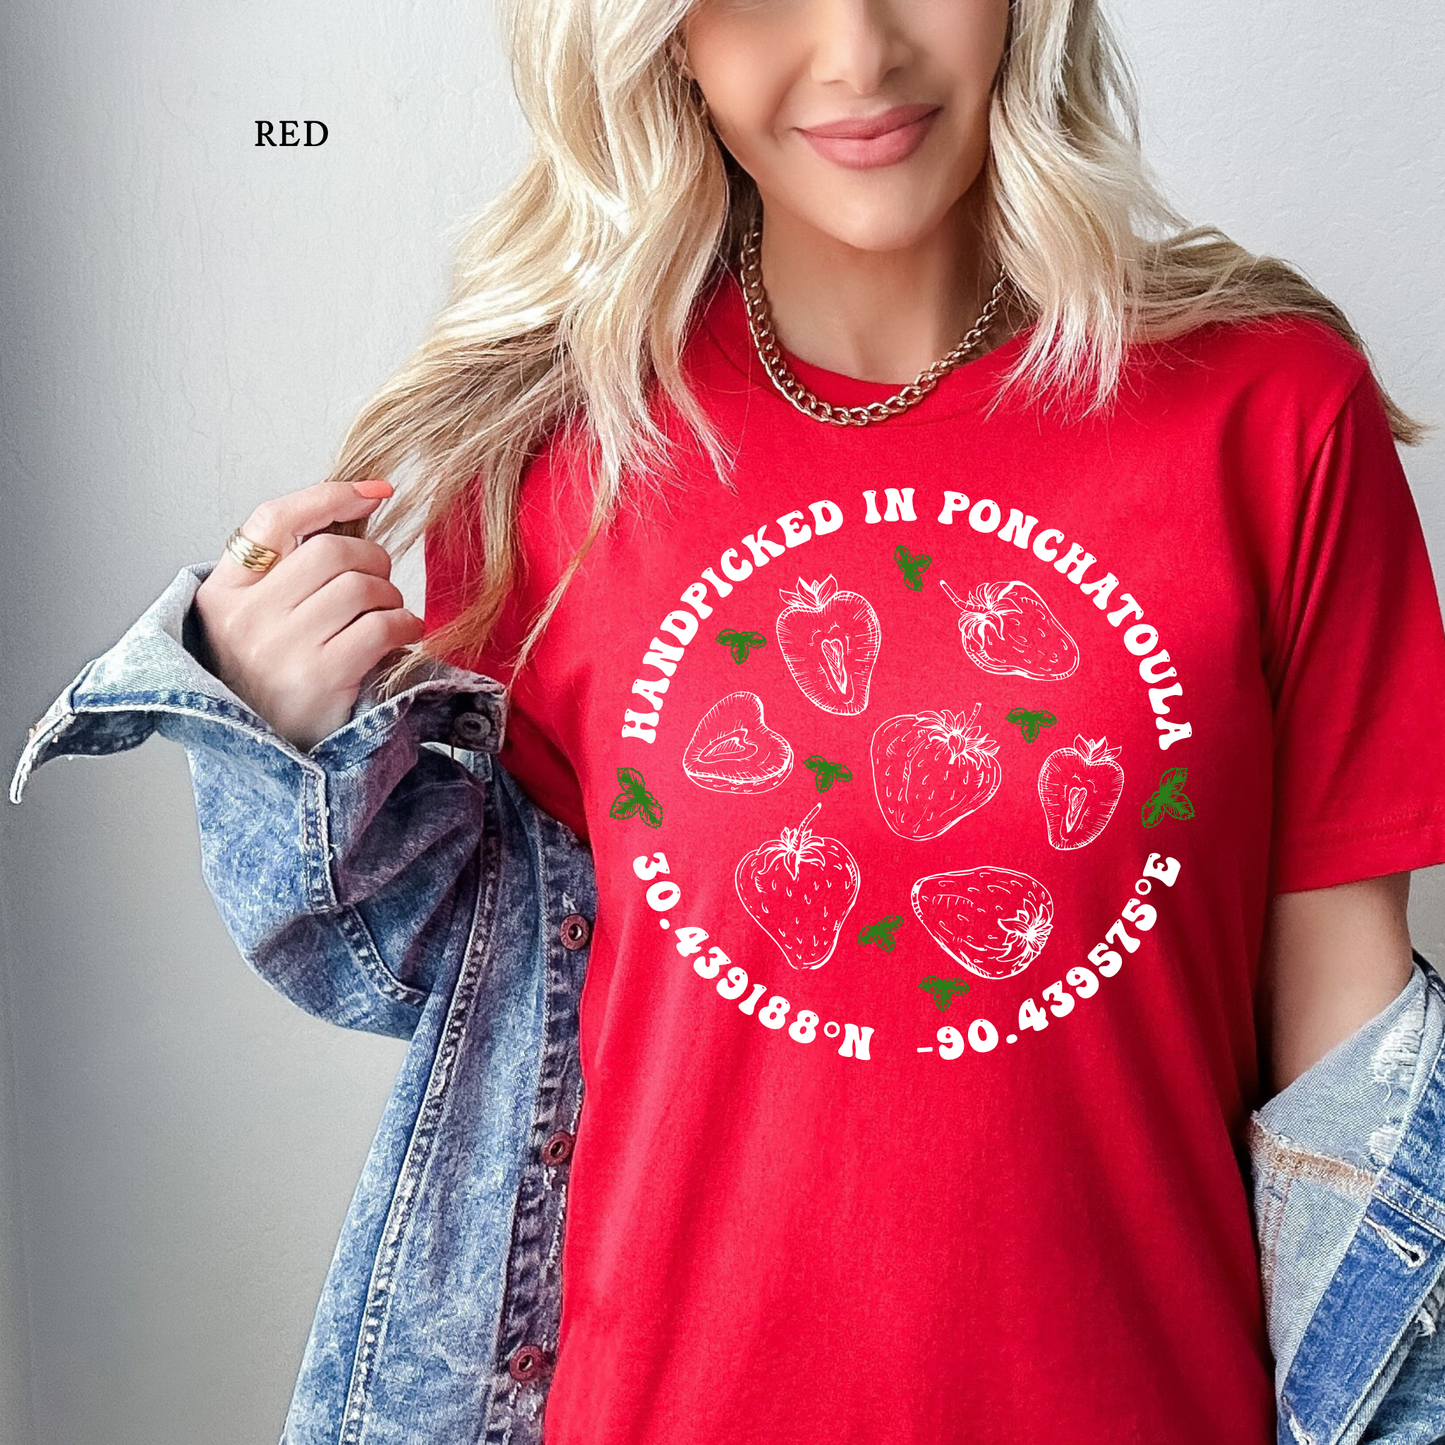 Handpicked in Ponchatoula - Strawberry Festival T-shirt | Baby - Adult